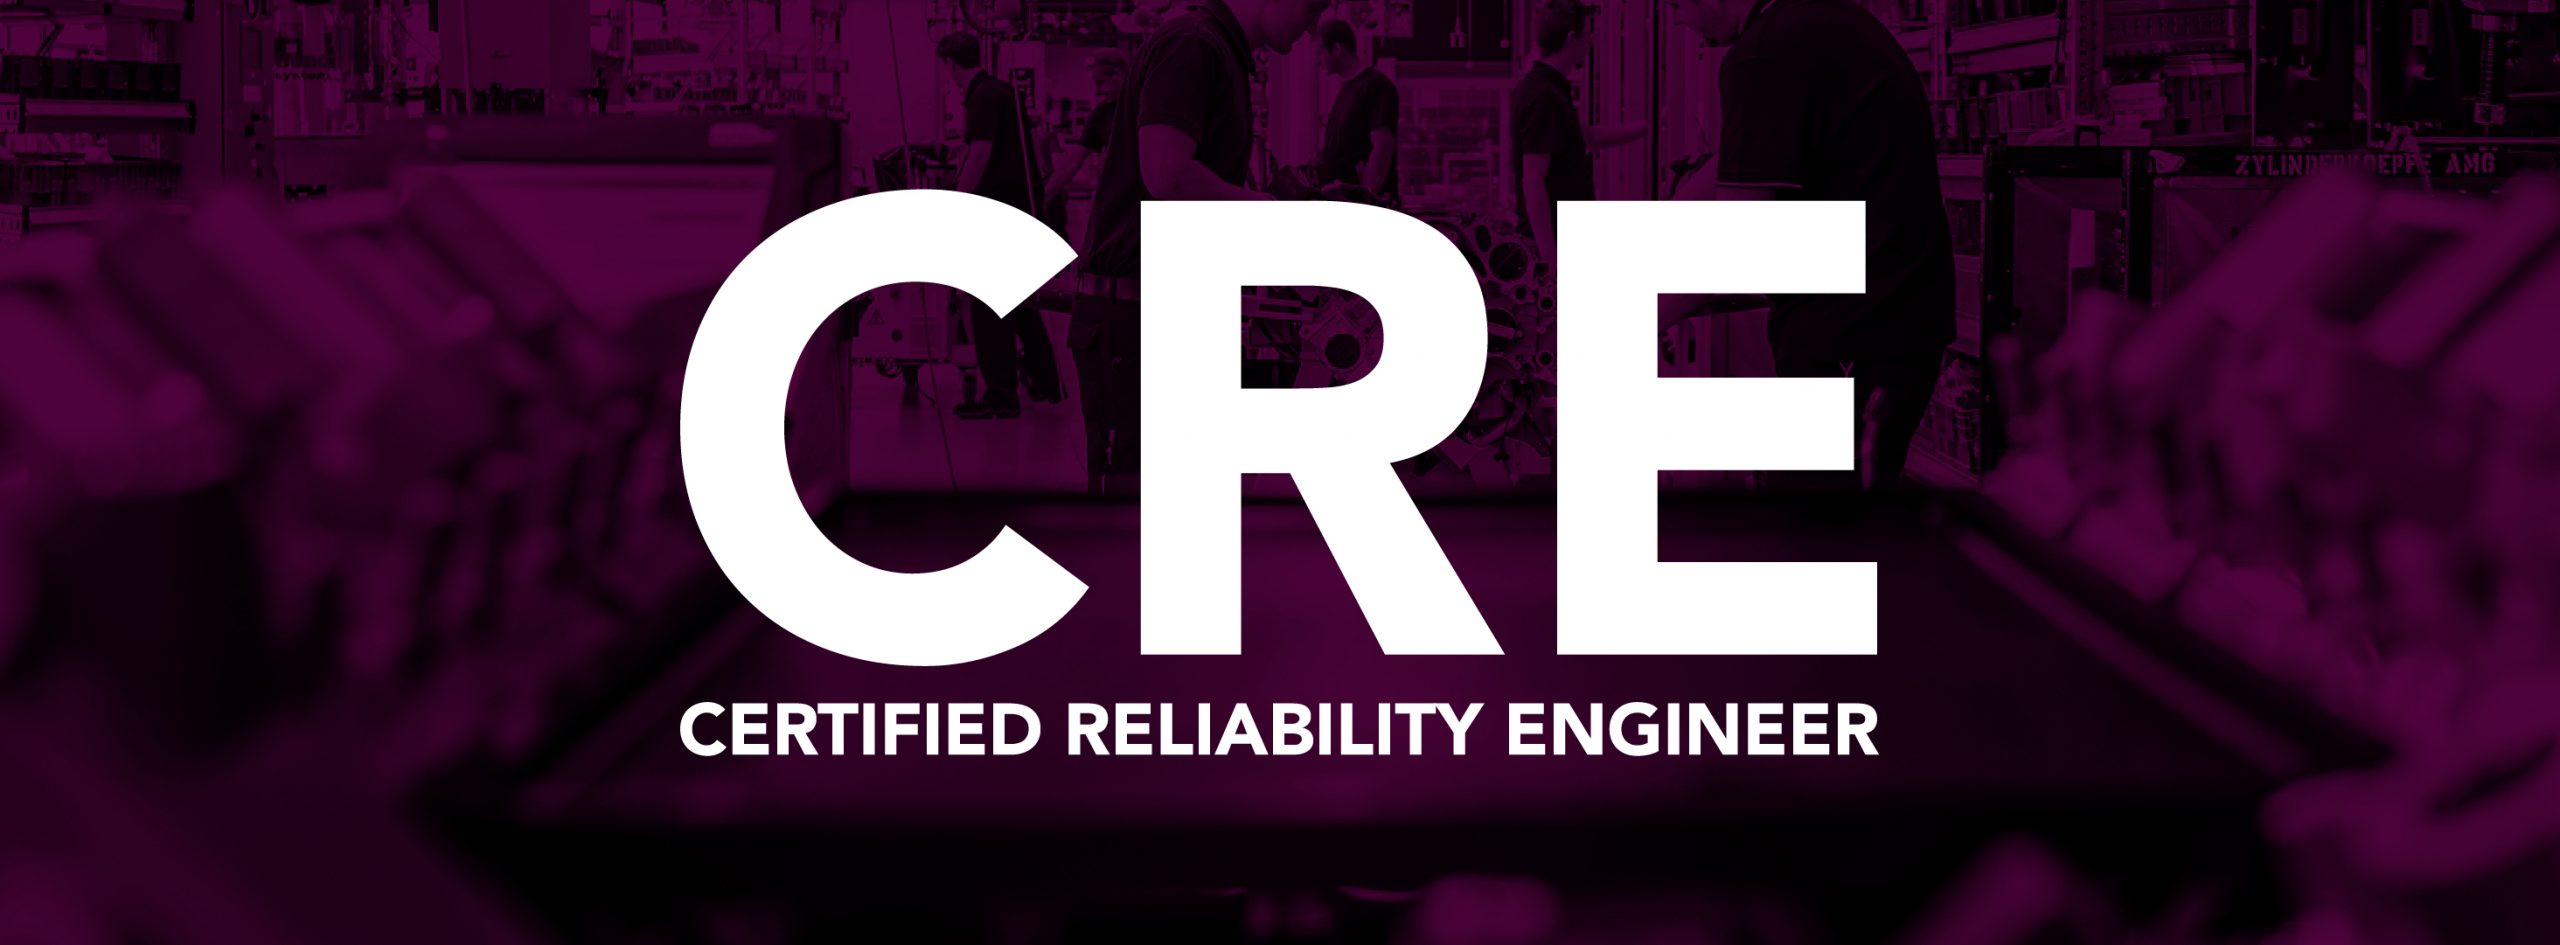 Certified Reliability Engineer (CRE)